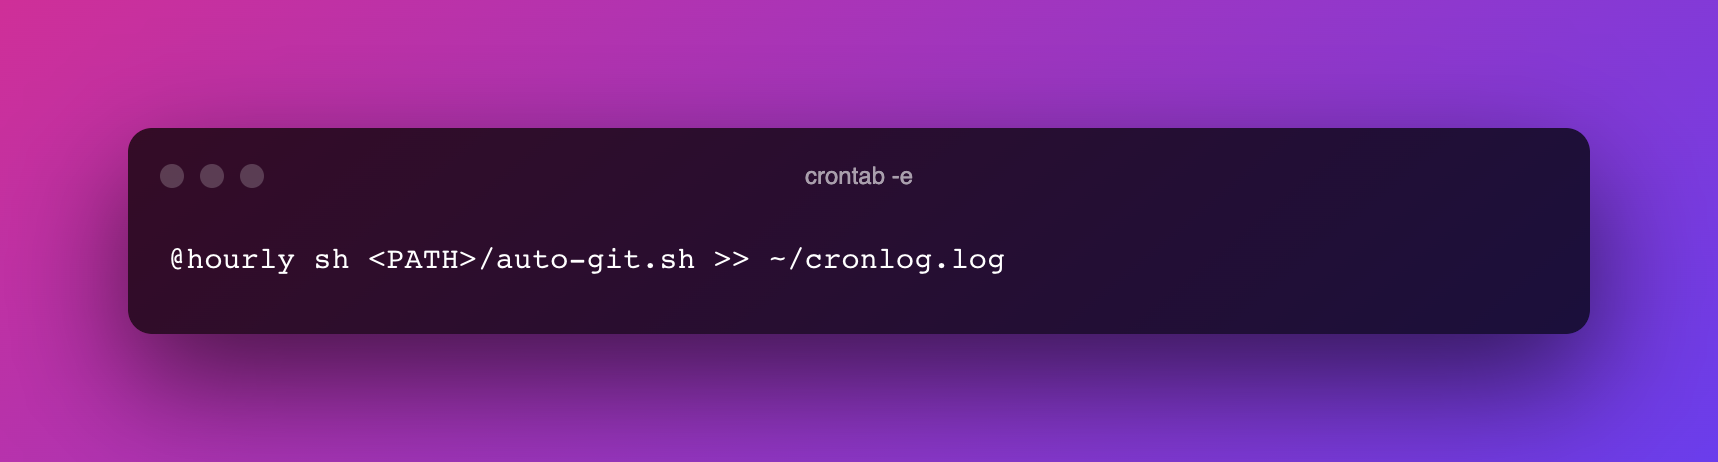 crontab code for automating it every hour